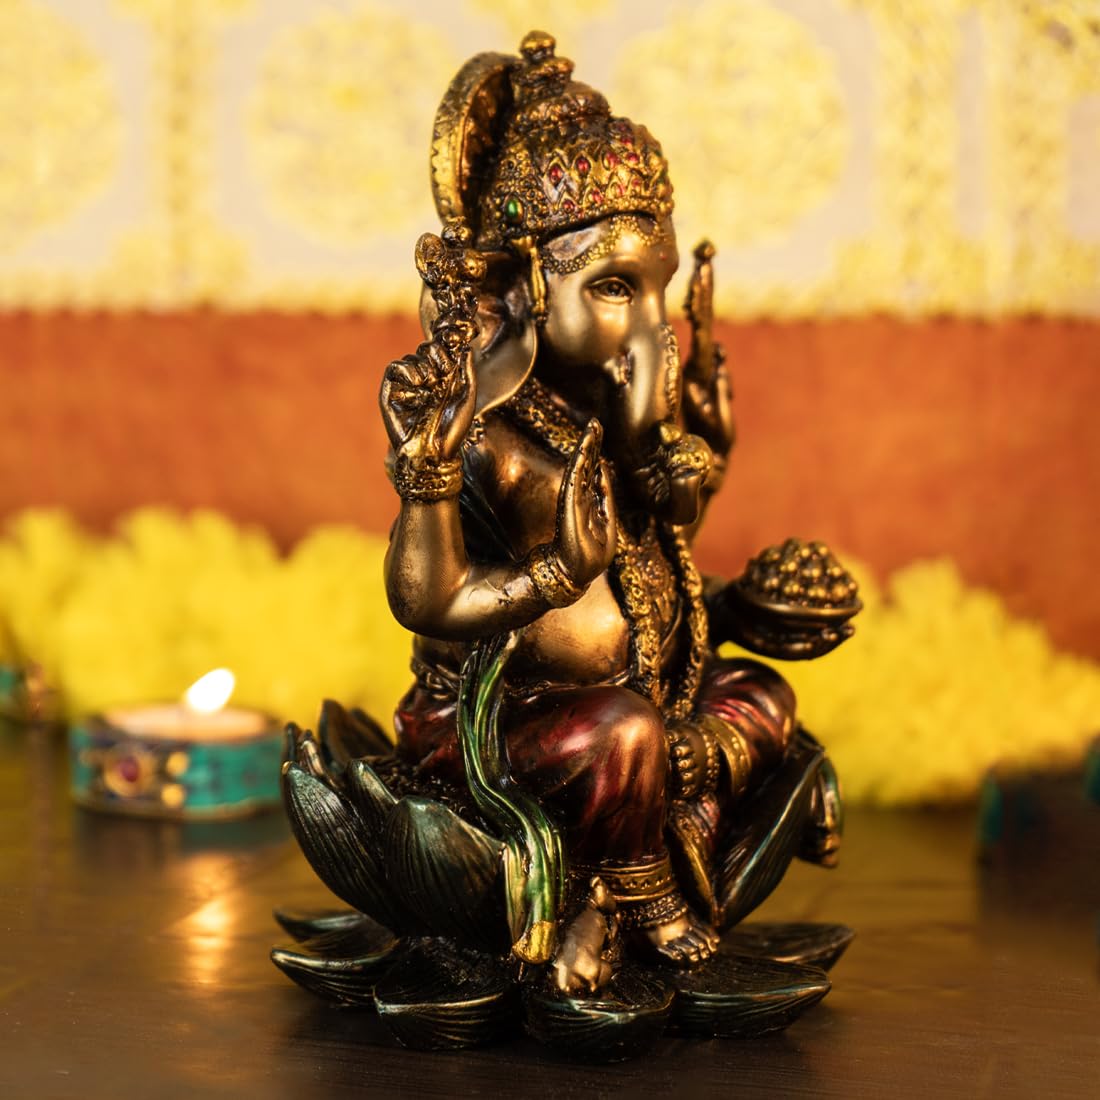 Amazon.com: TIED RIBBONS Ganesh Idol for Home Décor - Decoration Ganesha  Statue Gift Item (15 cm X 5 cm) : Home & Kitchen